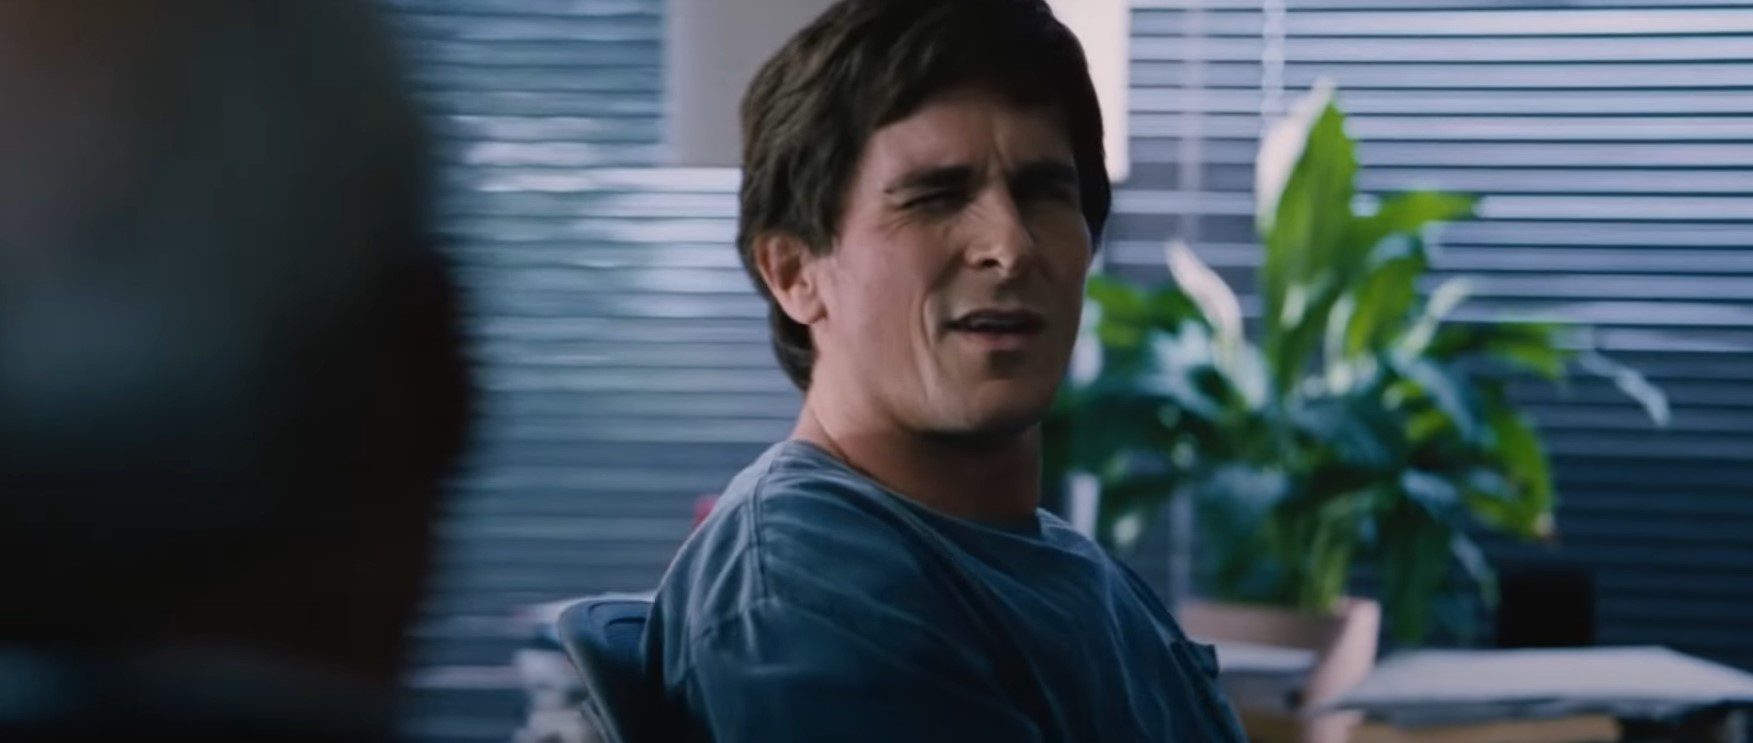 Where to watch the big short